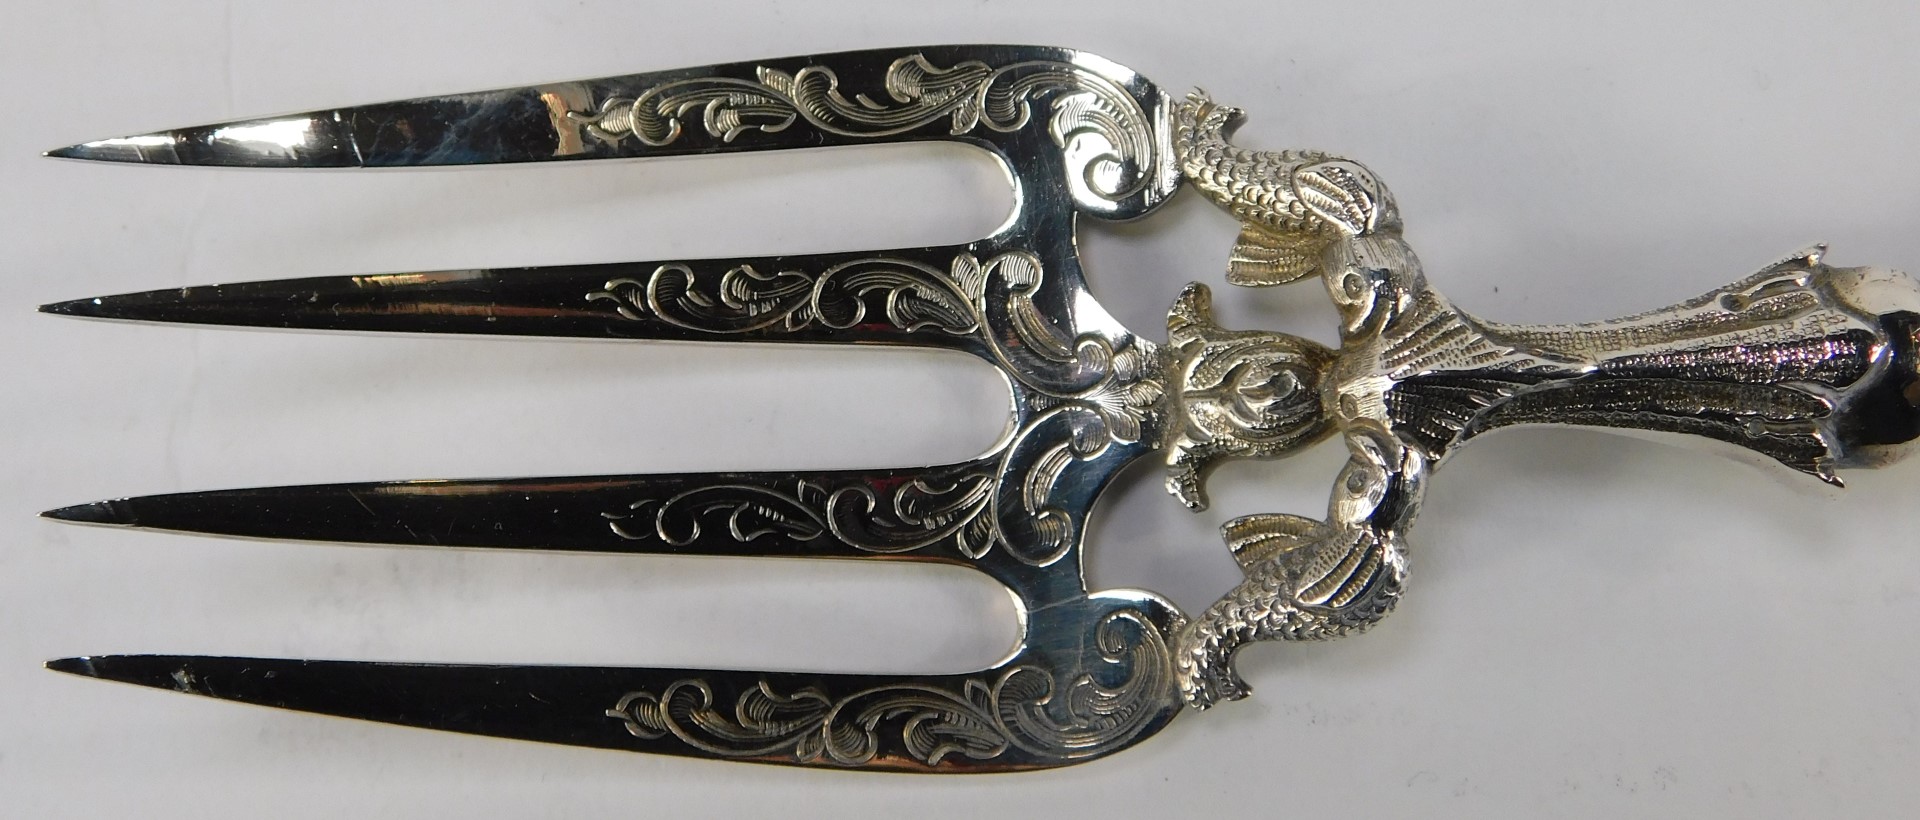 A Victorian silver spoon, with engraved decoration, reserve monogram engraved, London 1863, Edward V - Image 4 of 6